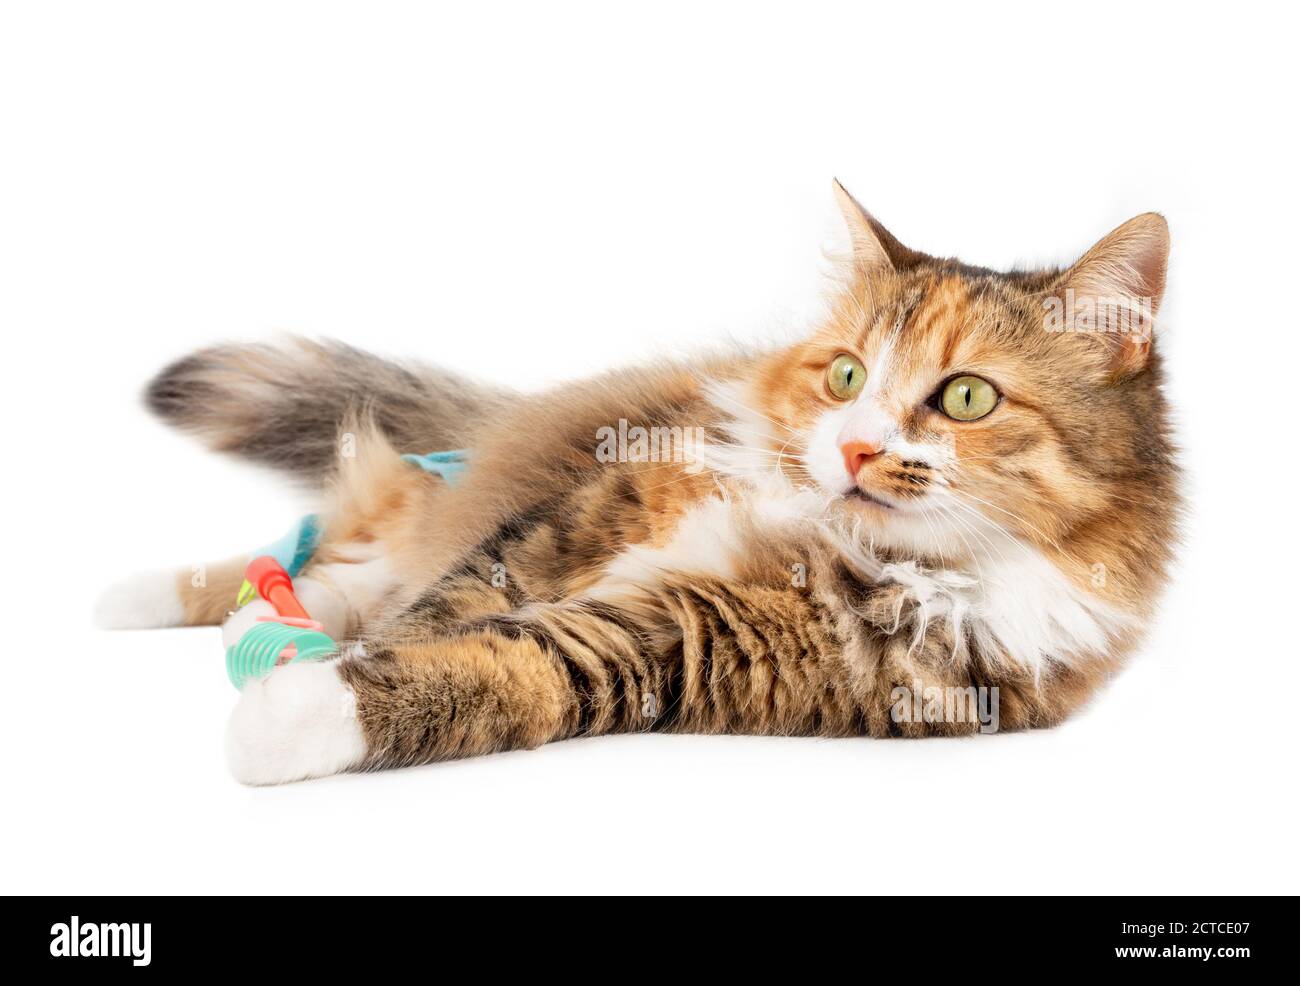 Multicolored long hair cat lying sideways with toys between her paws. Full body of relaxed kitty. Striking orange / white face markings. 1 year old. Stock Photo